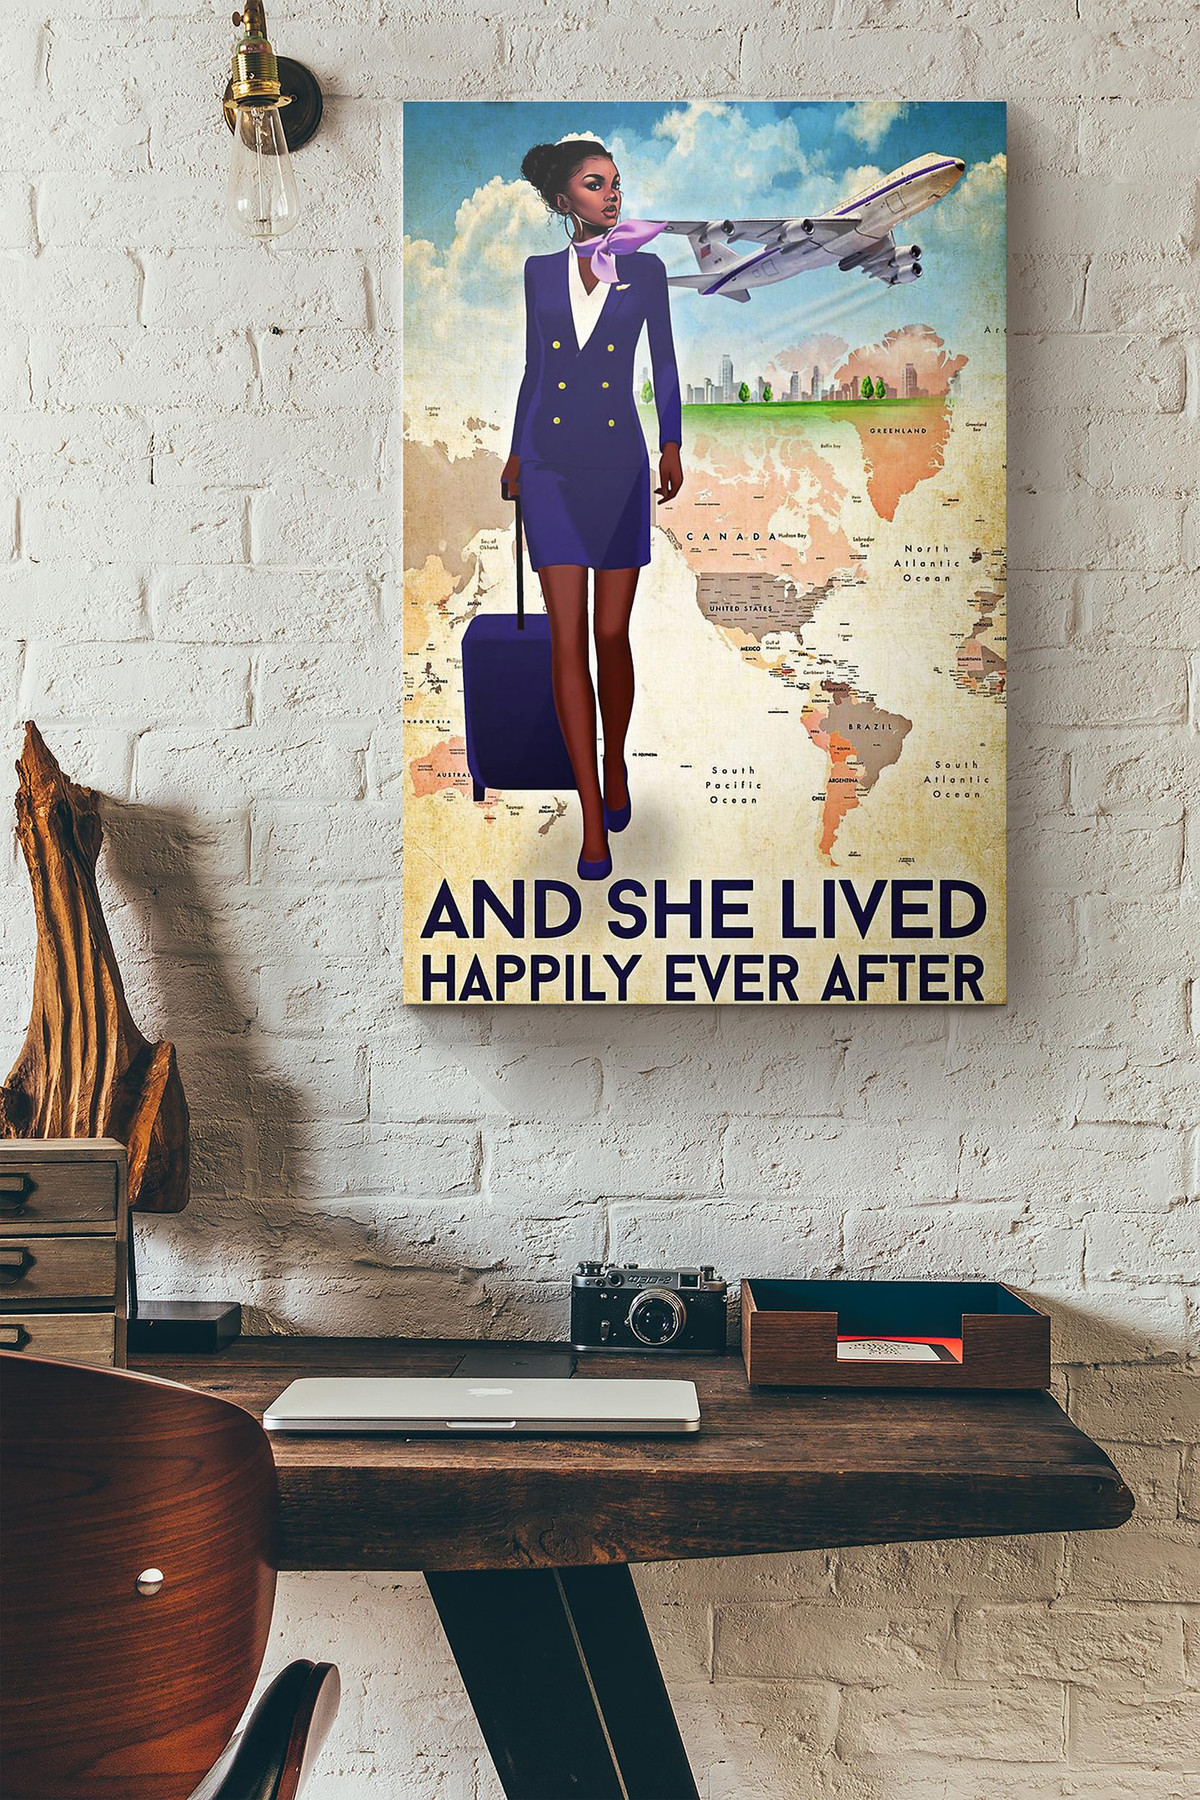 Black Girl Navy Style Flight Attendant And She Lived Happily Ever After Canvas Painting Ideas, Canvas Hanging Prints, Gift Idea Framed Prints, Canvas Paintings Wrapped Canvas 8x10